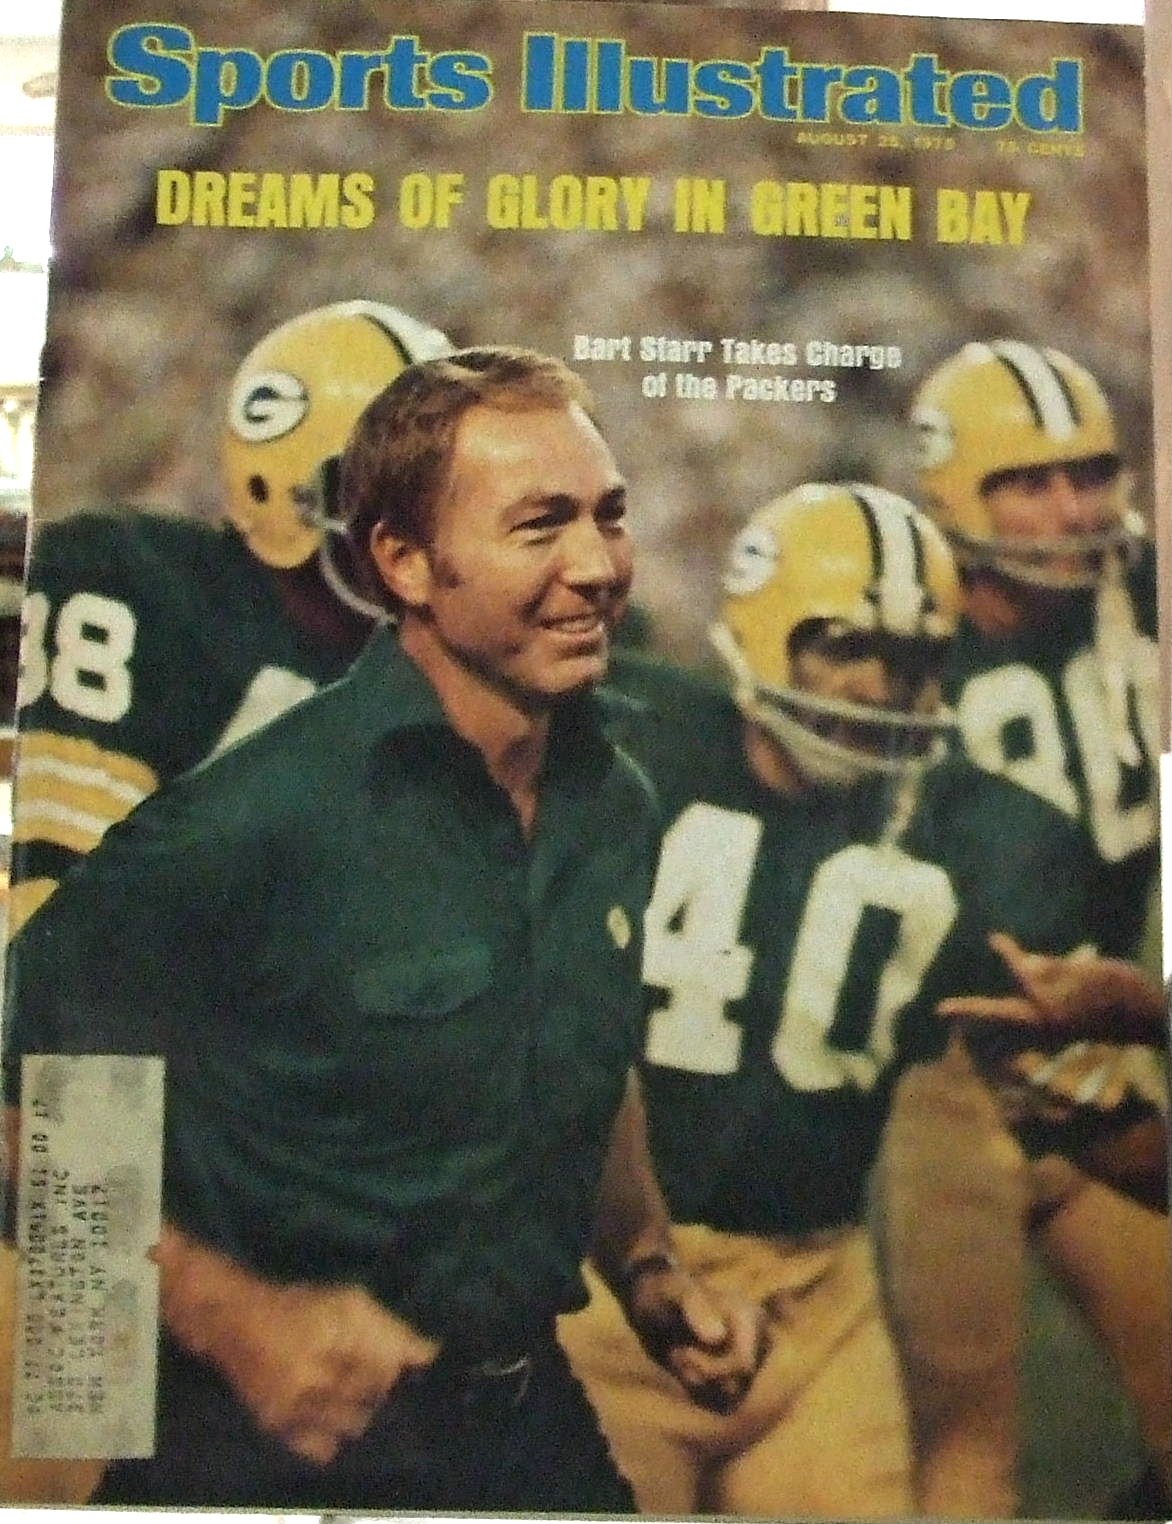 bart starr coaching - Sports Illustrated Dreams Of Glory In Green Bay Bart Starr Takes Charge of the Packers De Neten Av